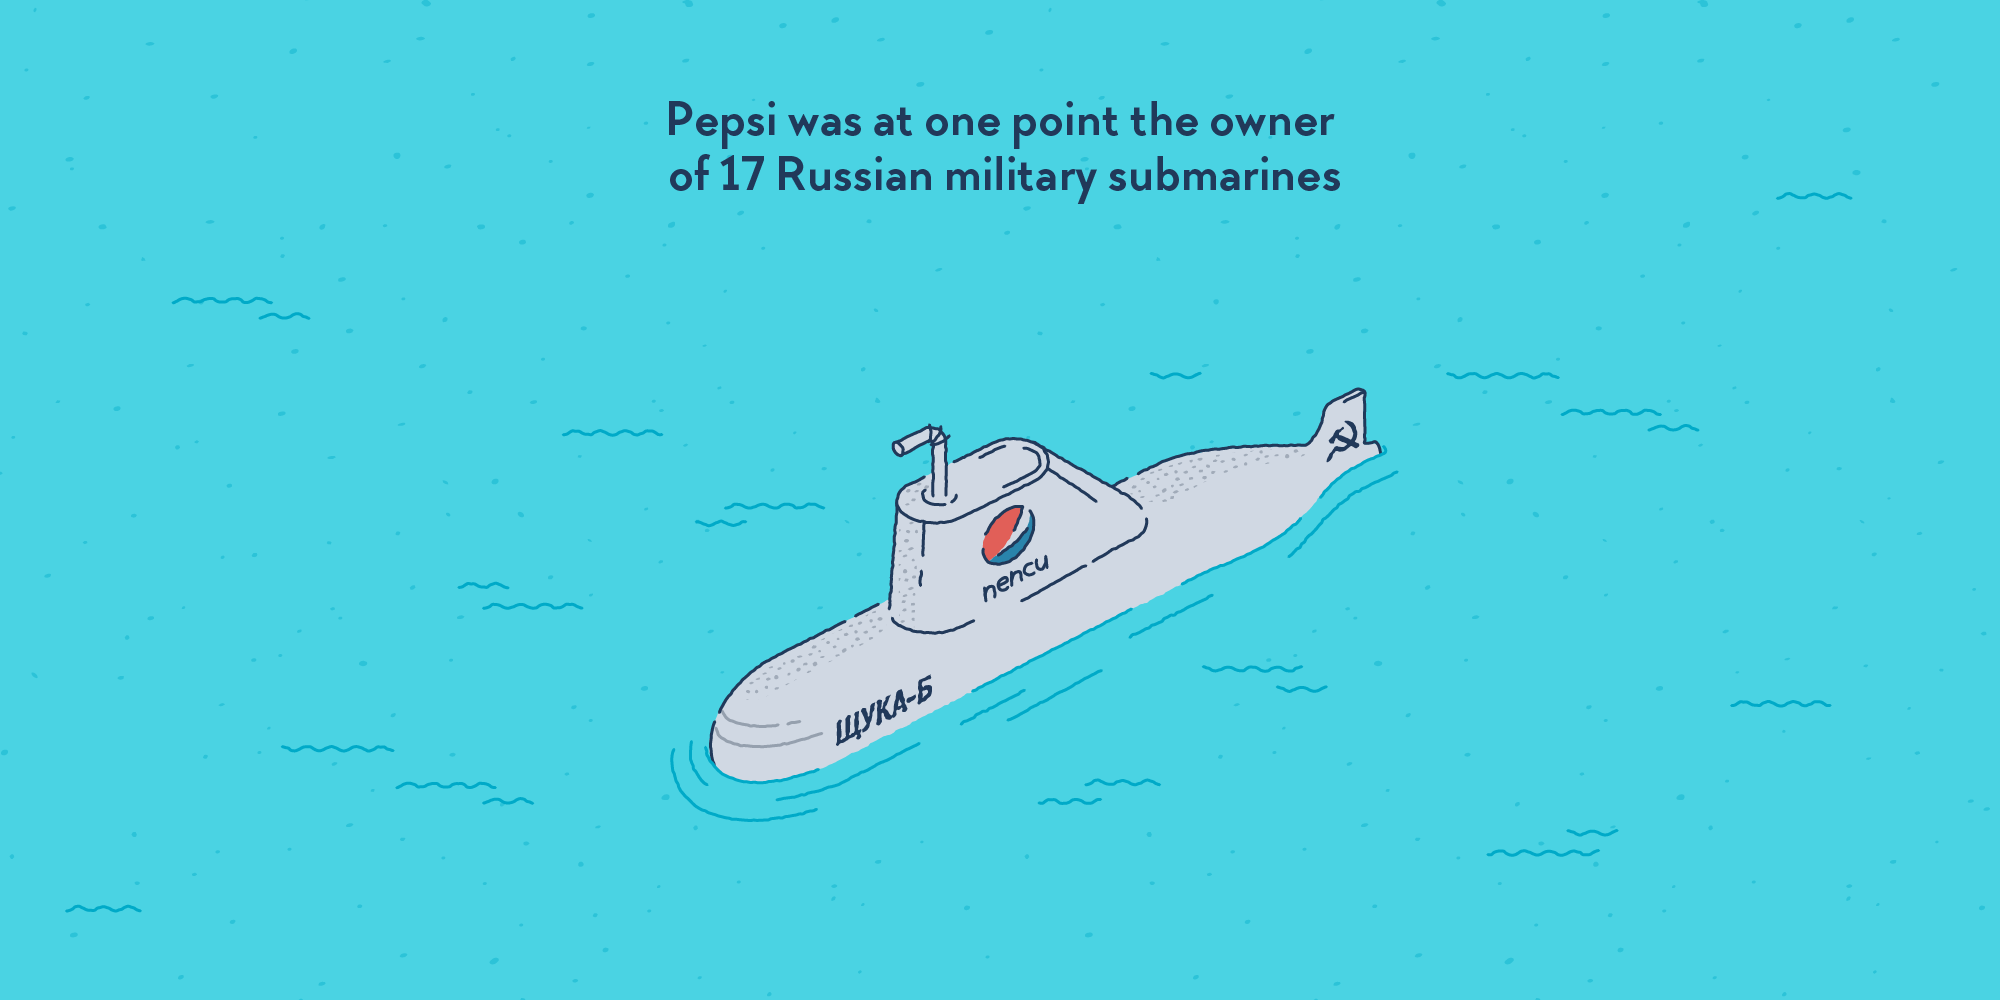 A submarine half submerged in the sea, featuring the Pepsi logo in Russian.